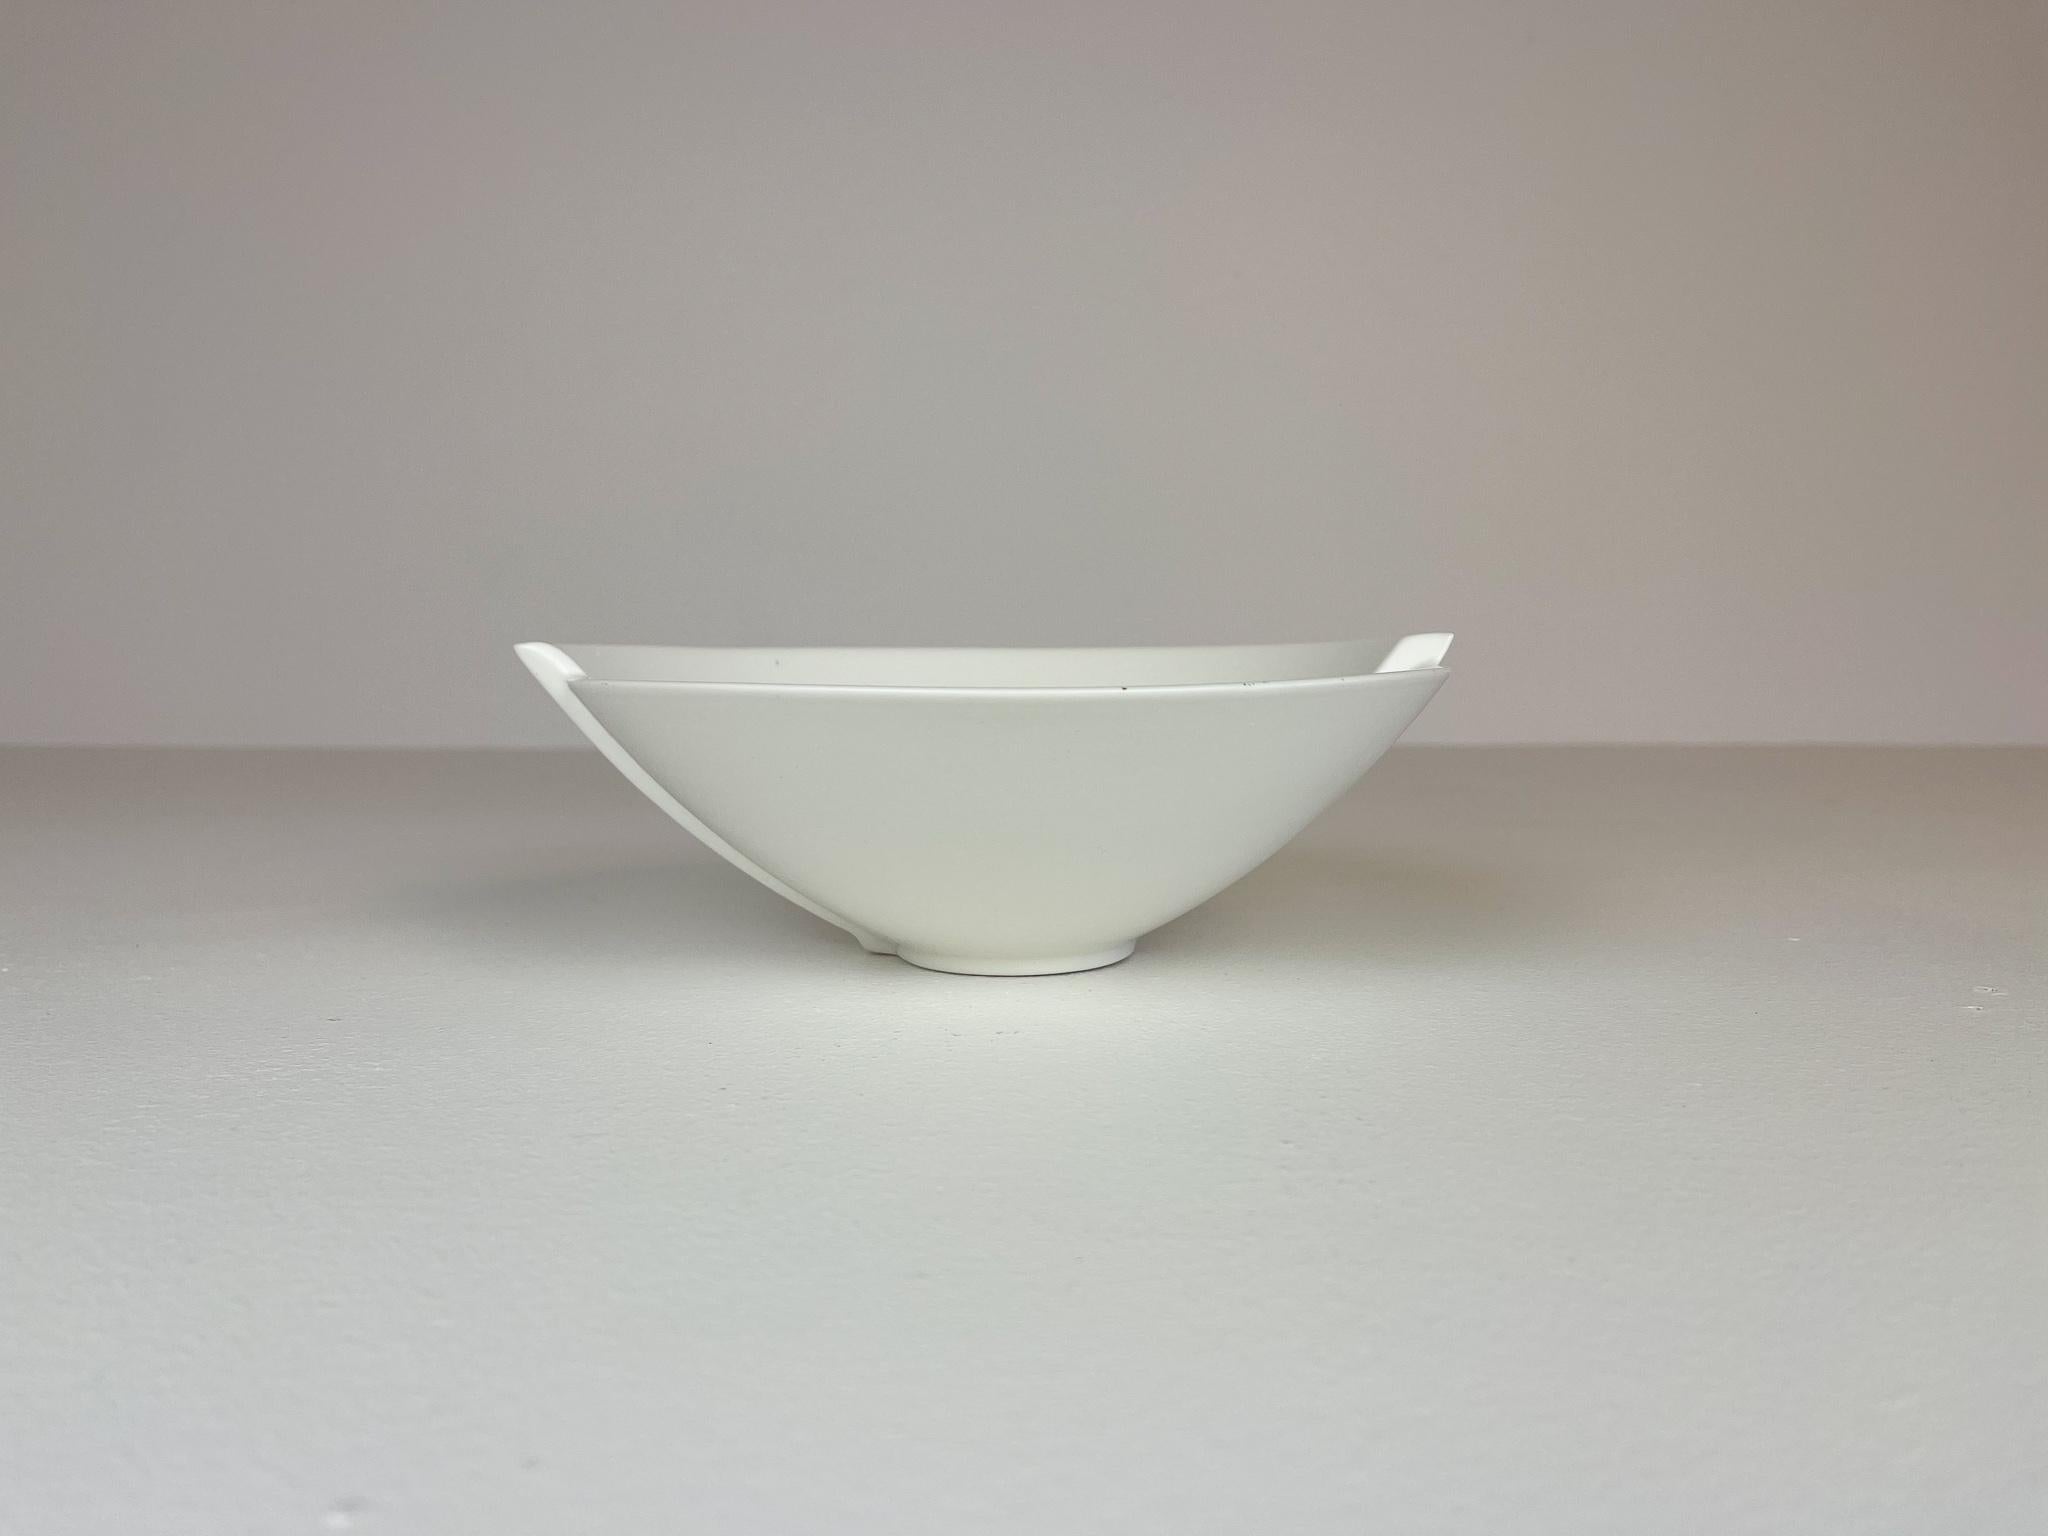 This abstract matt white stoneware bowl model was named Surrea (surreal) and designed by Wilhelm Kåge in the 1950s and manufactured at Gustavsberg, Sweden.

Not signed in bottom, signs of use under bowl.